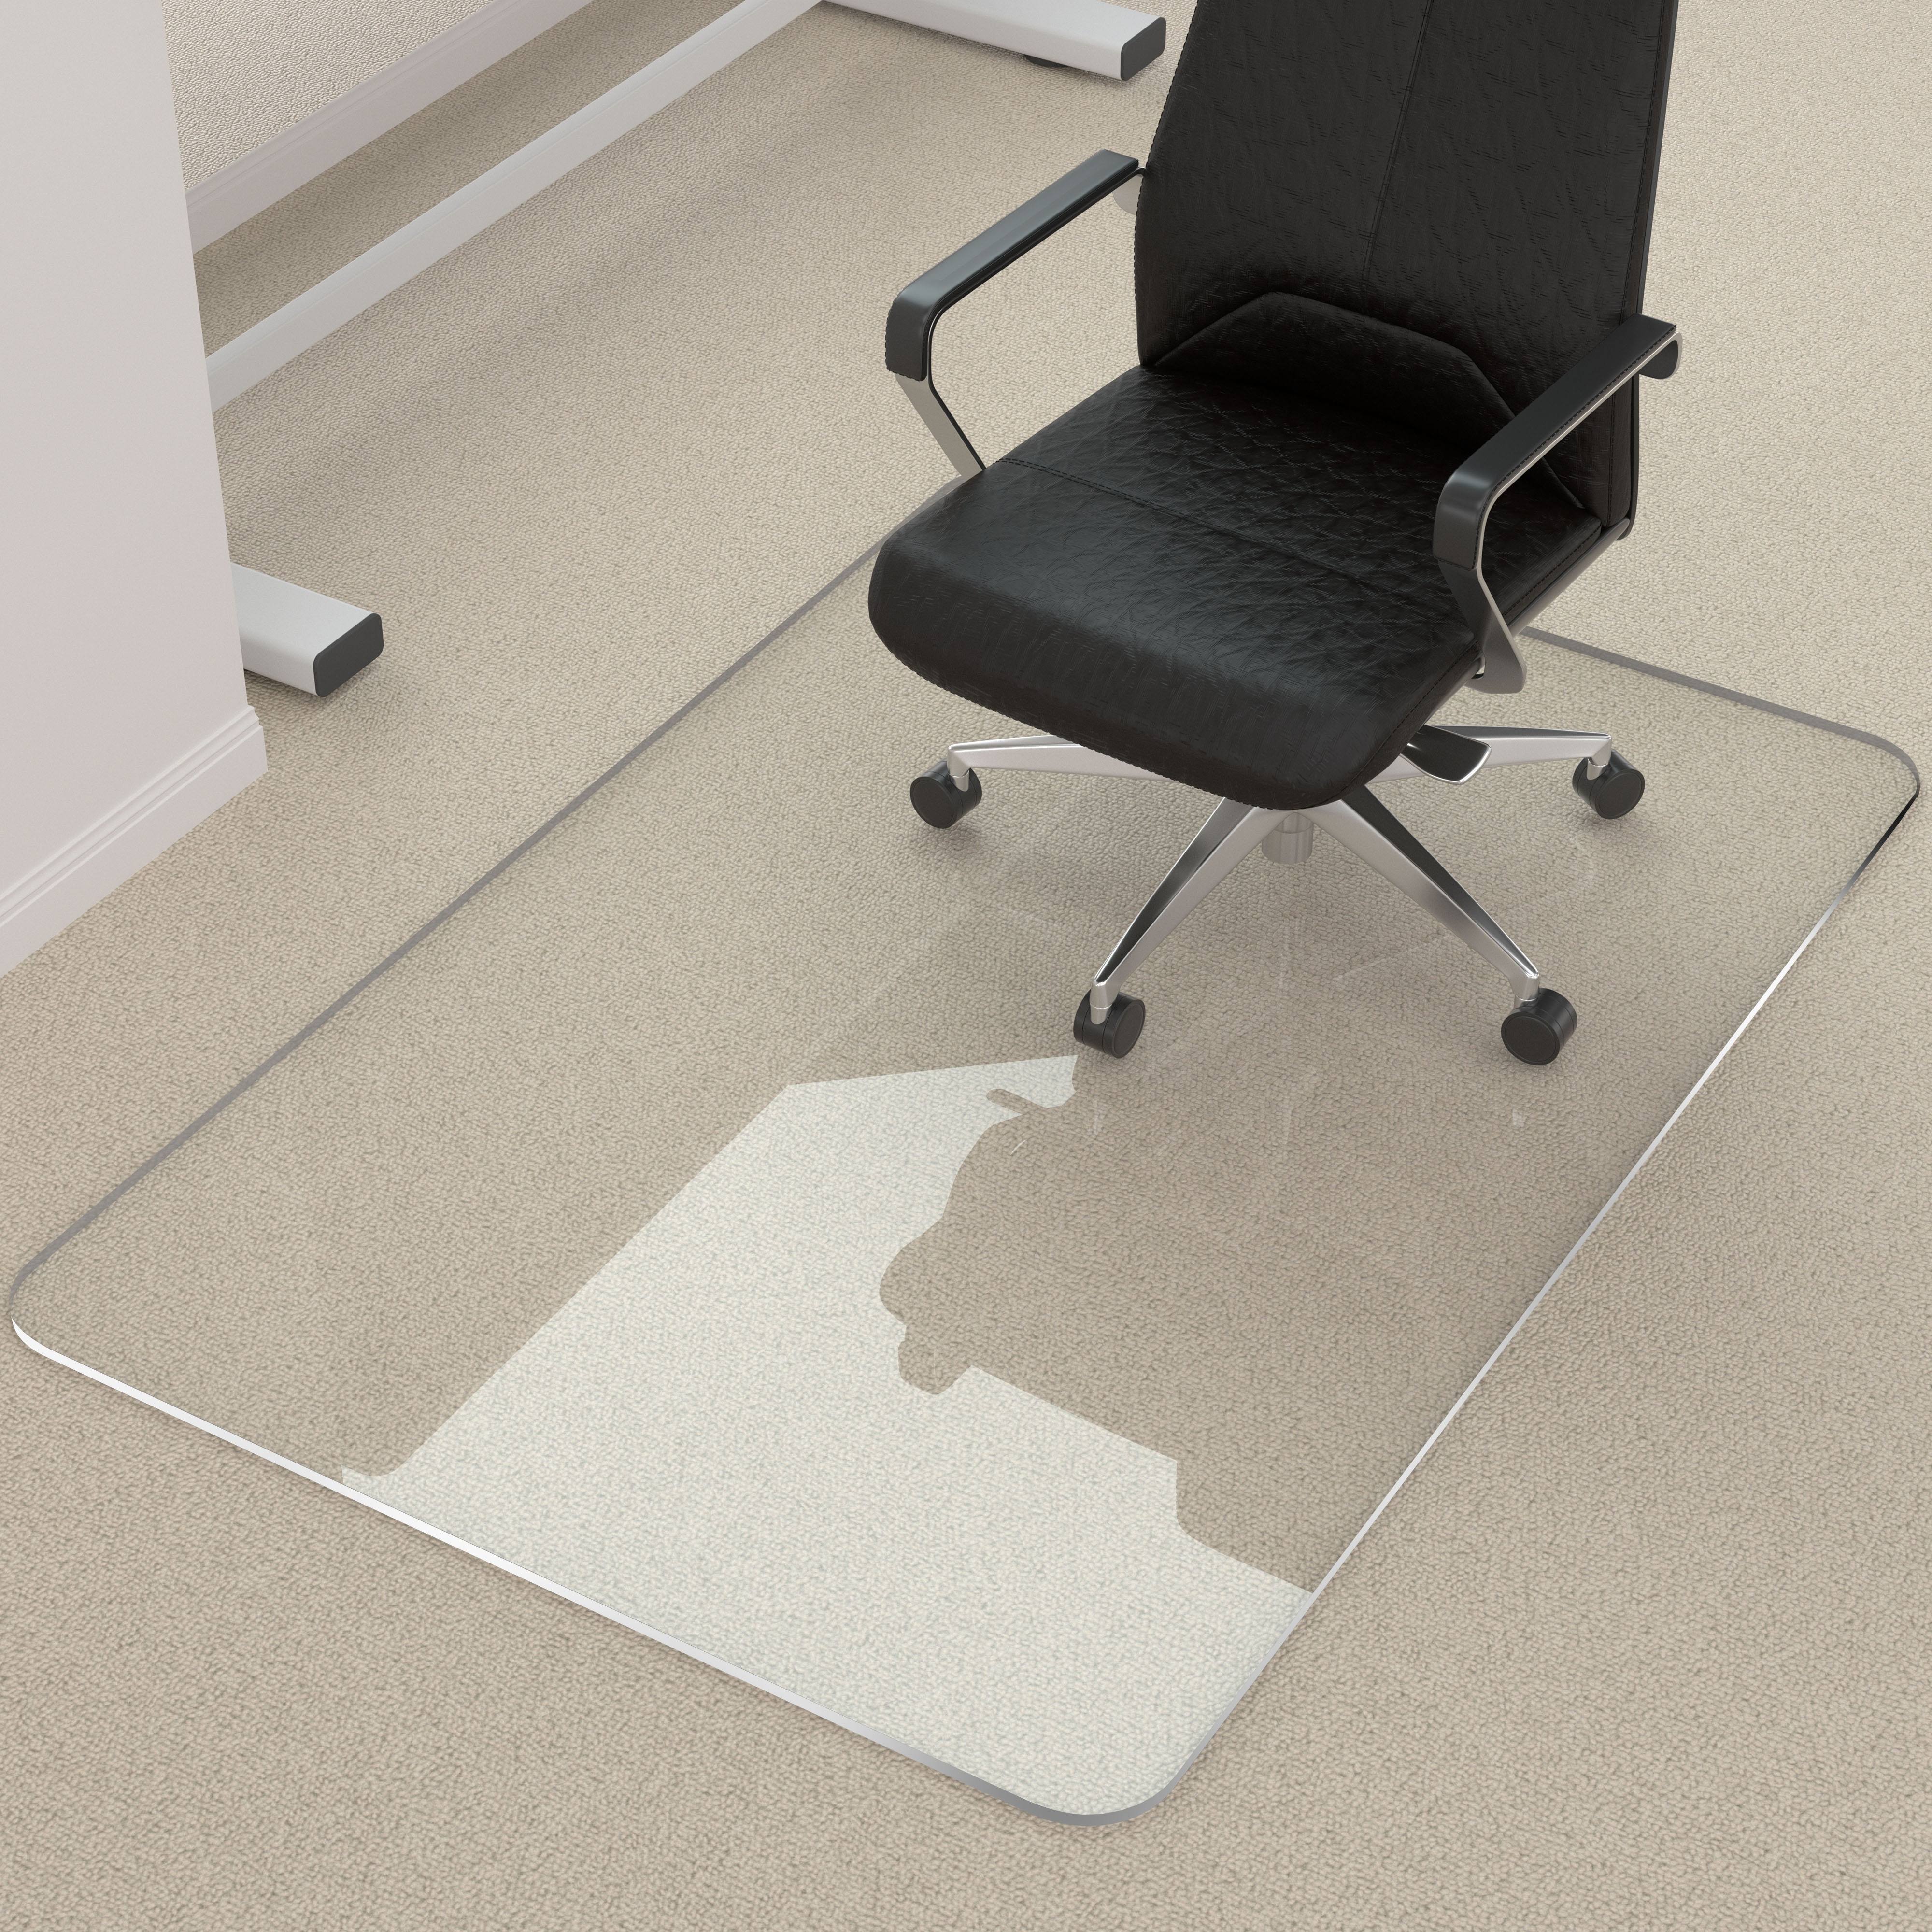 

Office Chair Mat Carpet - Computer Chair Mat For Carpet, Crystal Clear Heavy Duty Hard Chair Mat For Carpet Or Hard Floor, Floor Mat For Office Chair On Carpet For Work, Home, Gaming, 36" X 47